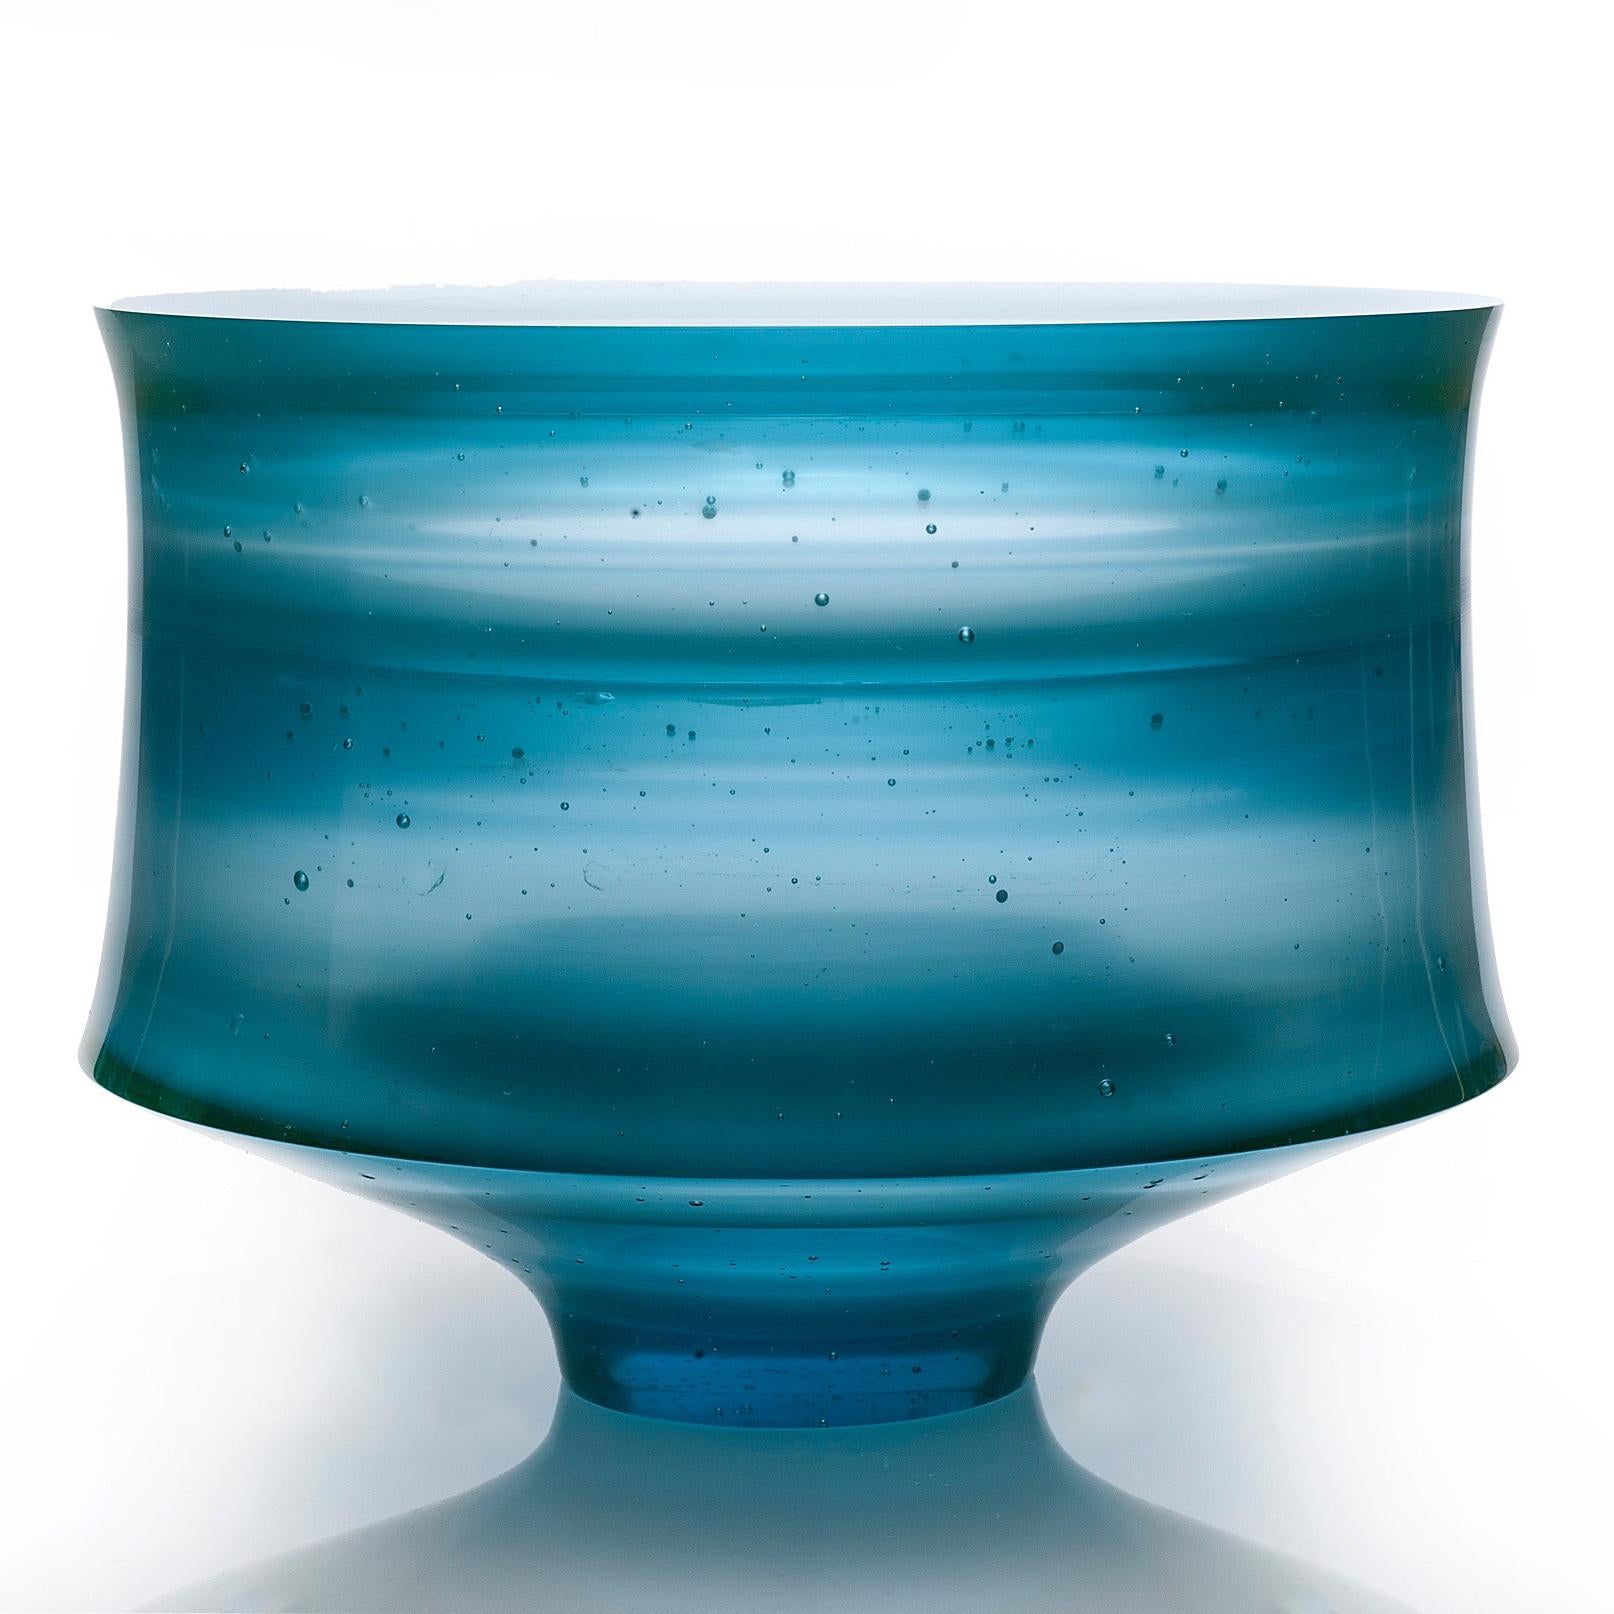 British Corymb, a Unique Aqua/Turquoise Glass Art Work and Centrepiece by Paul Stopler